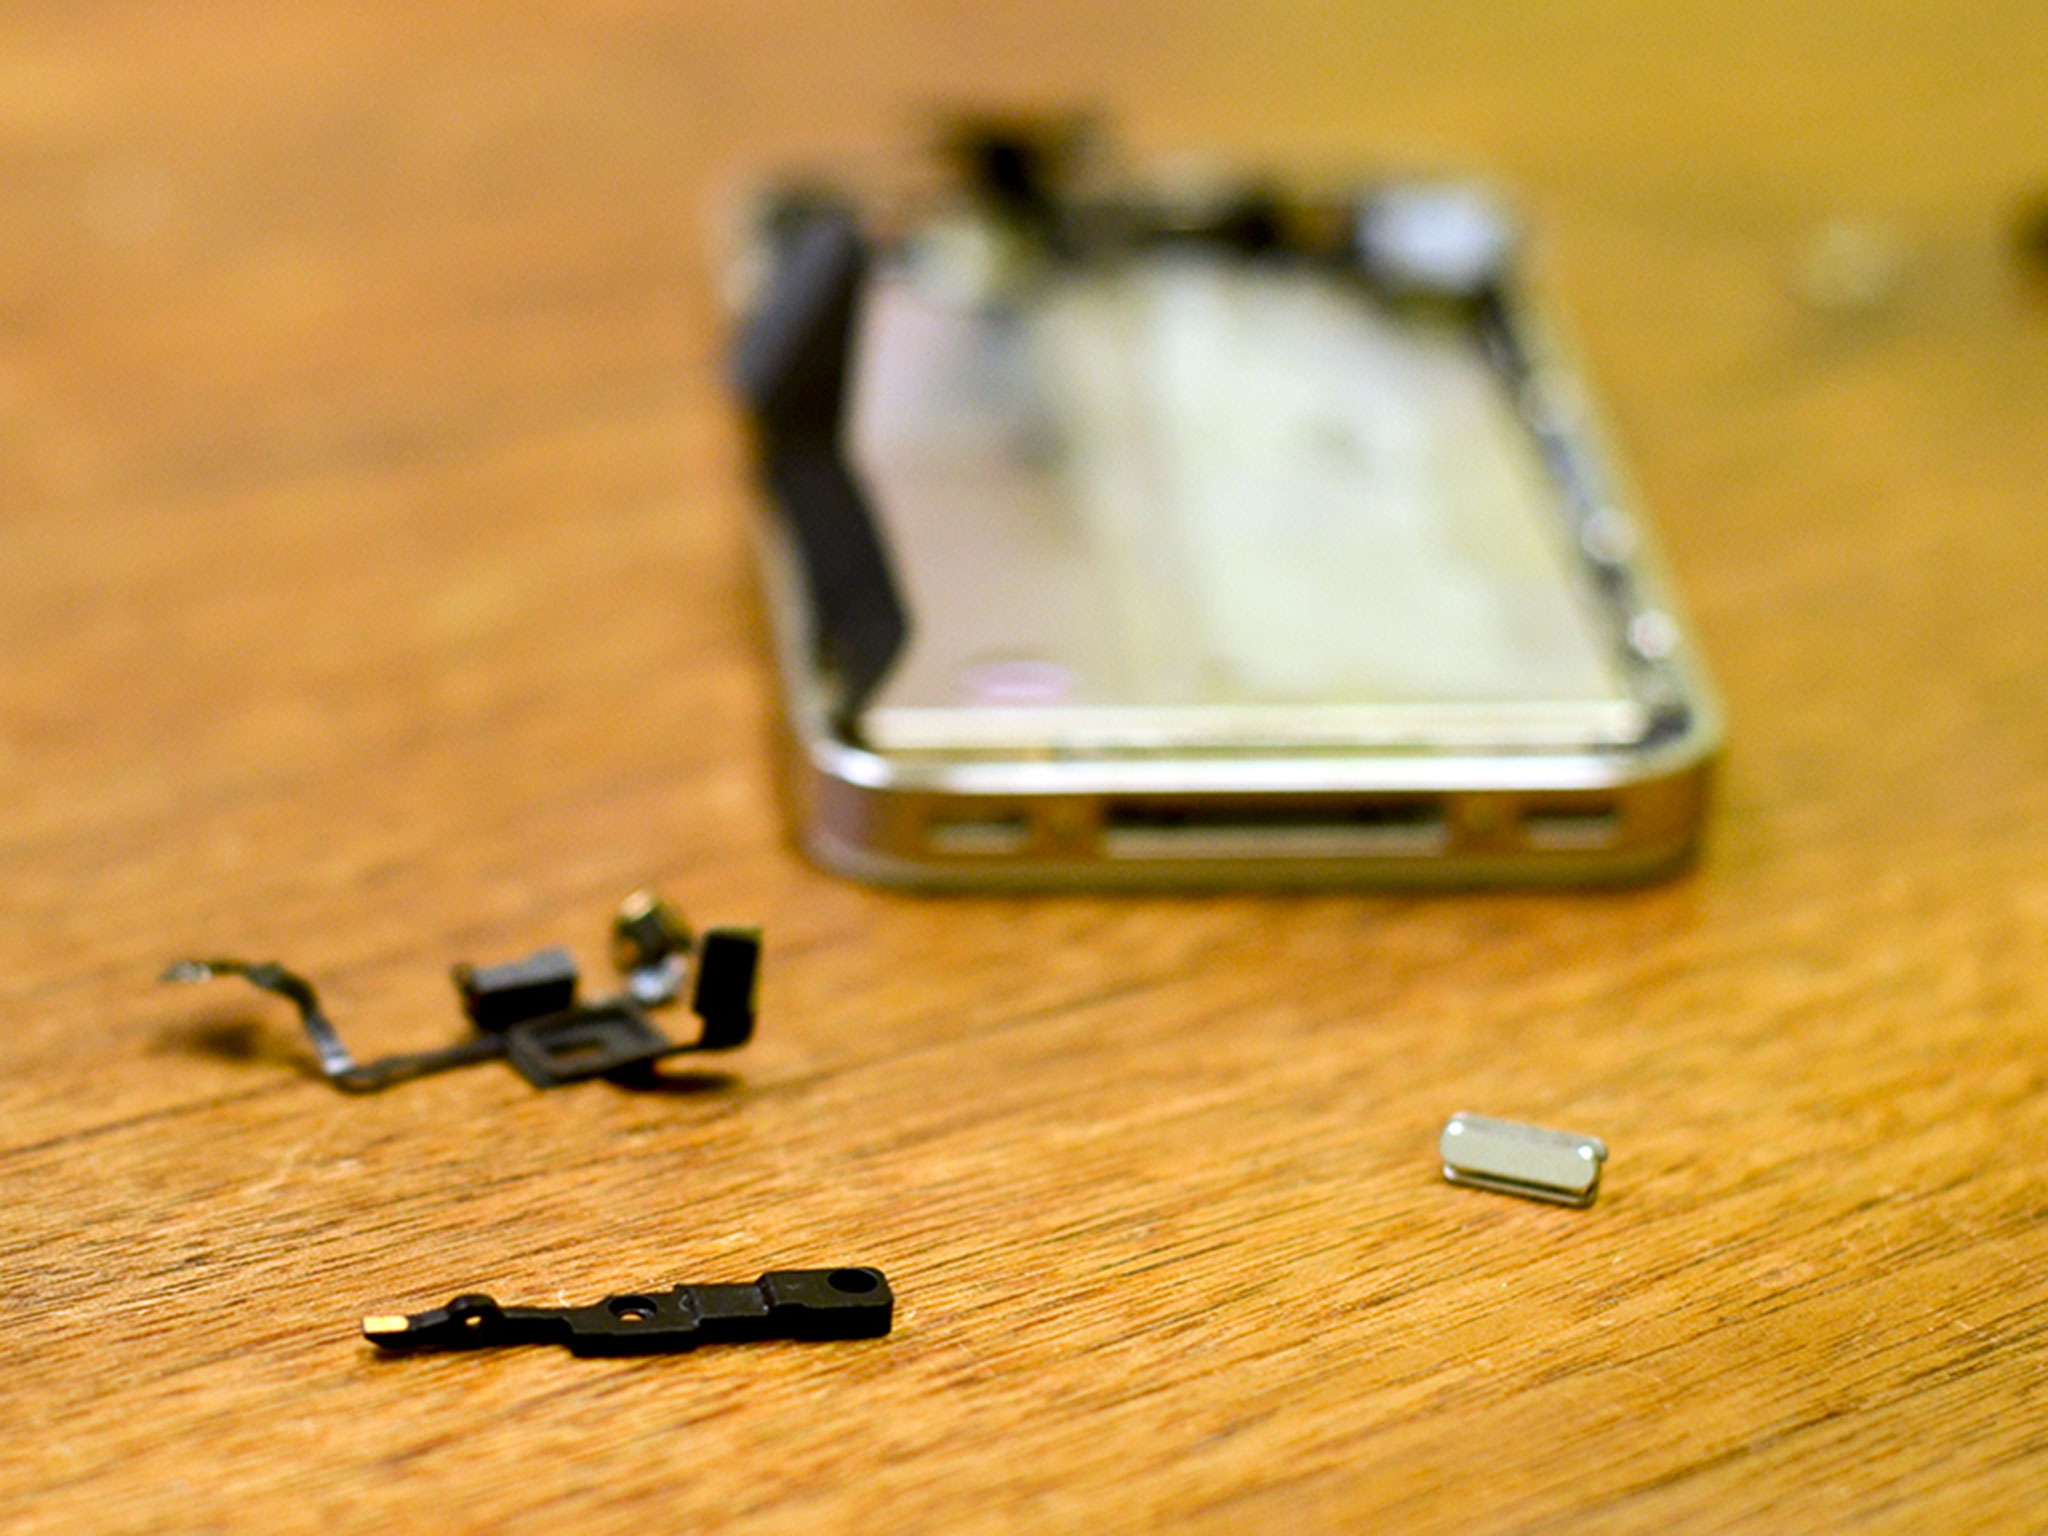 How to replace a GSM iPhone 4 power button cable